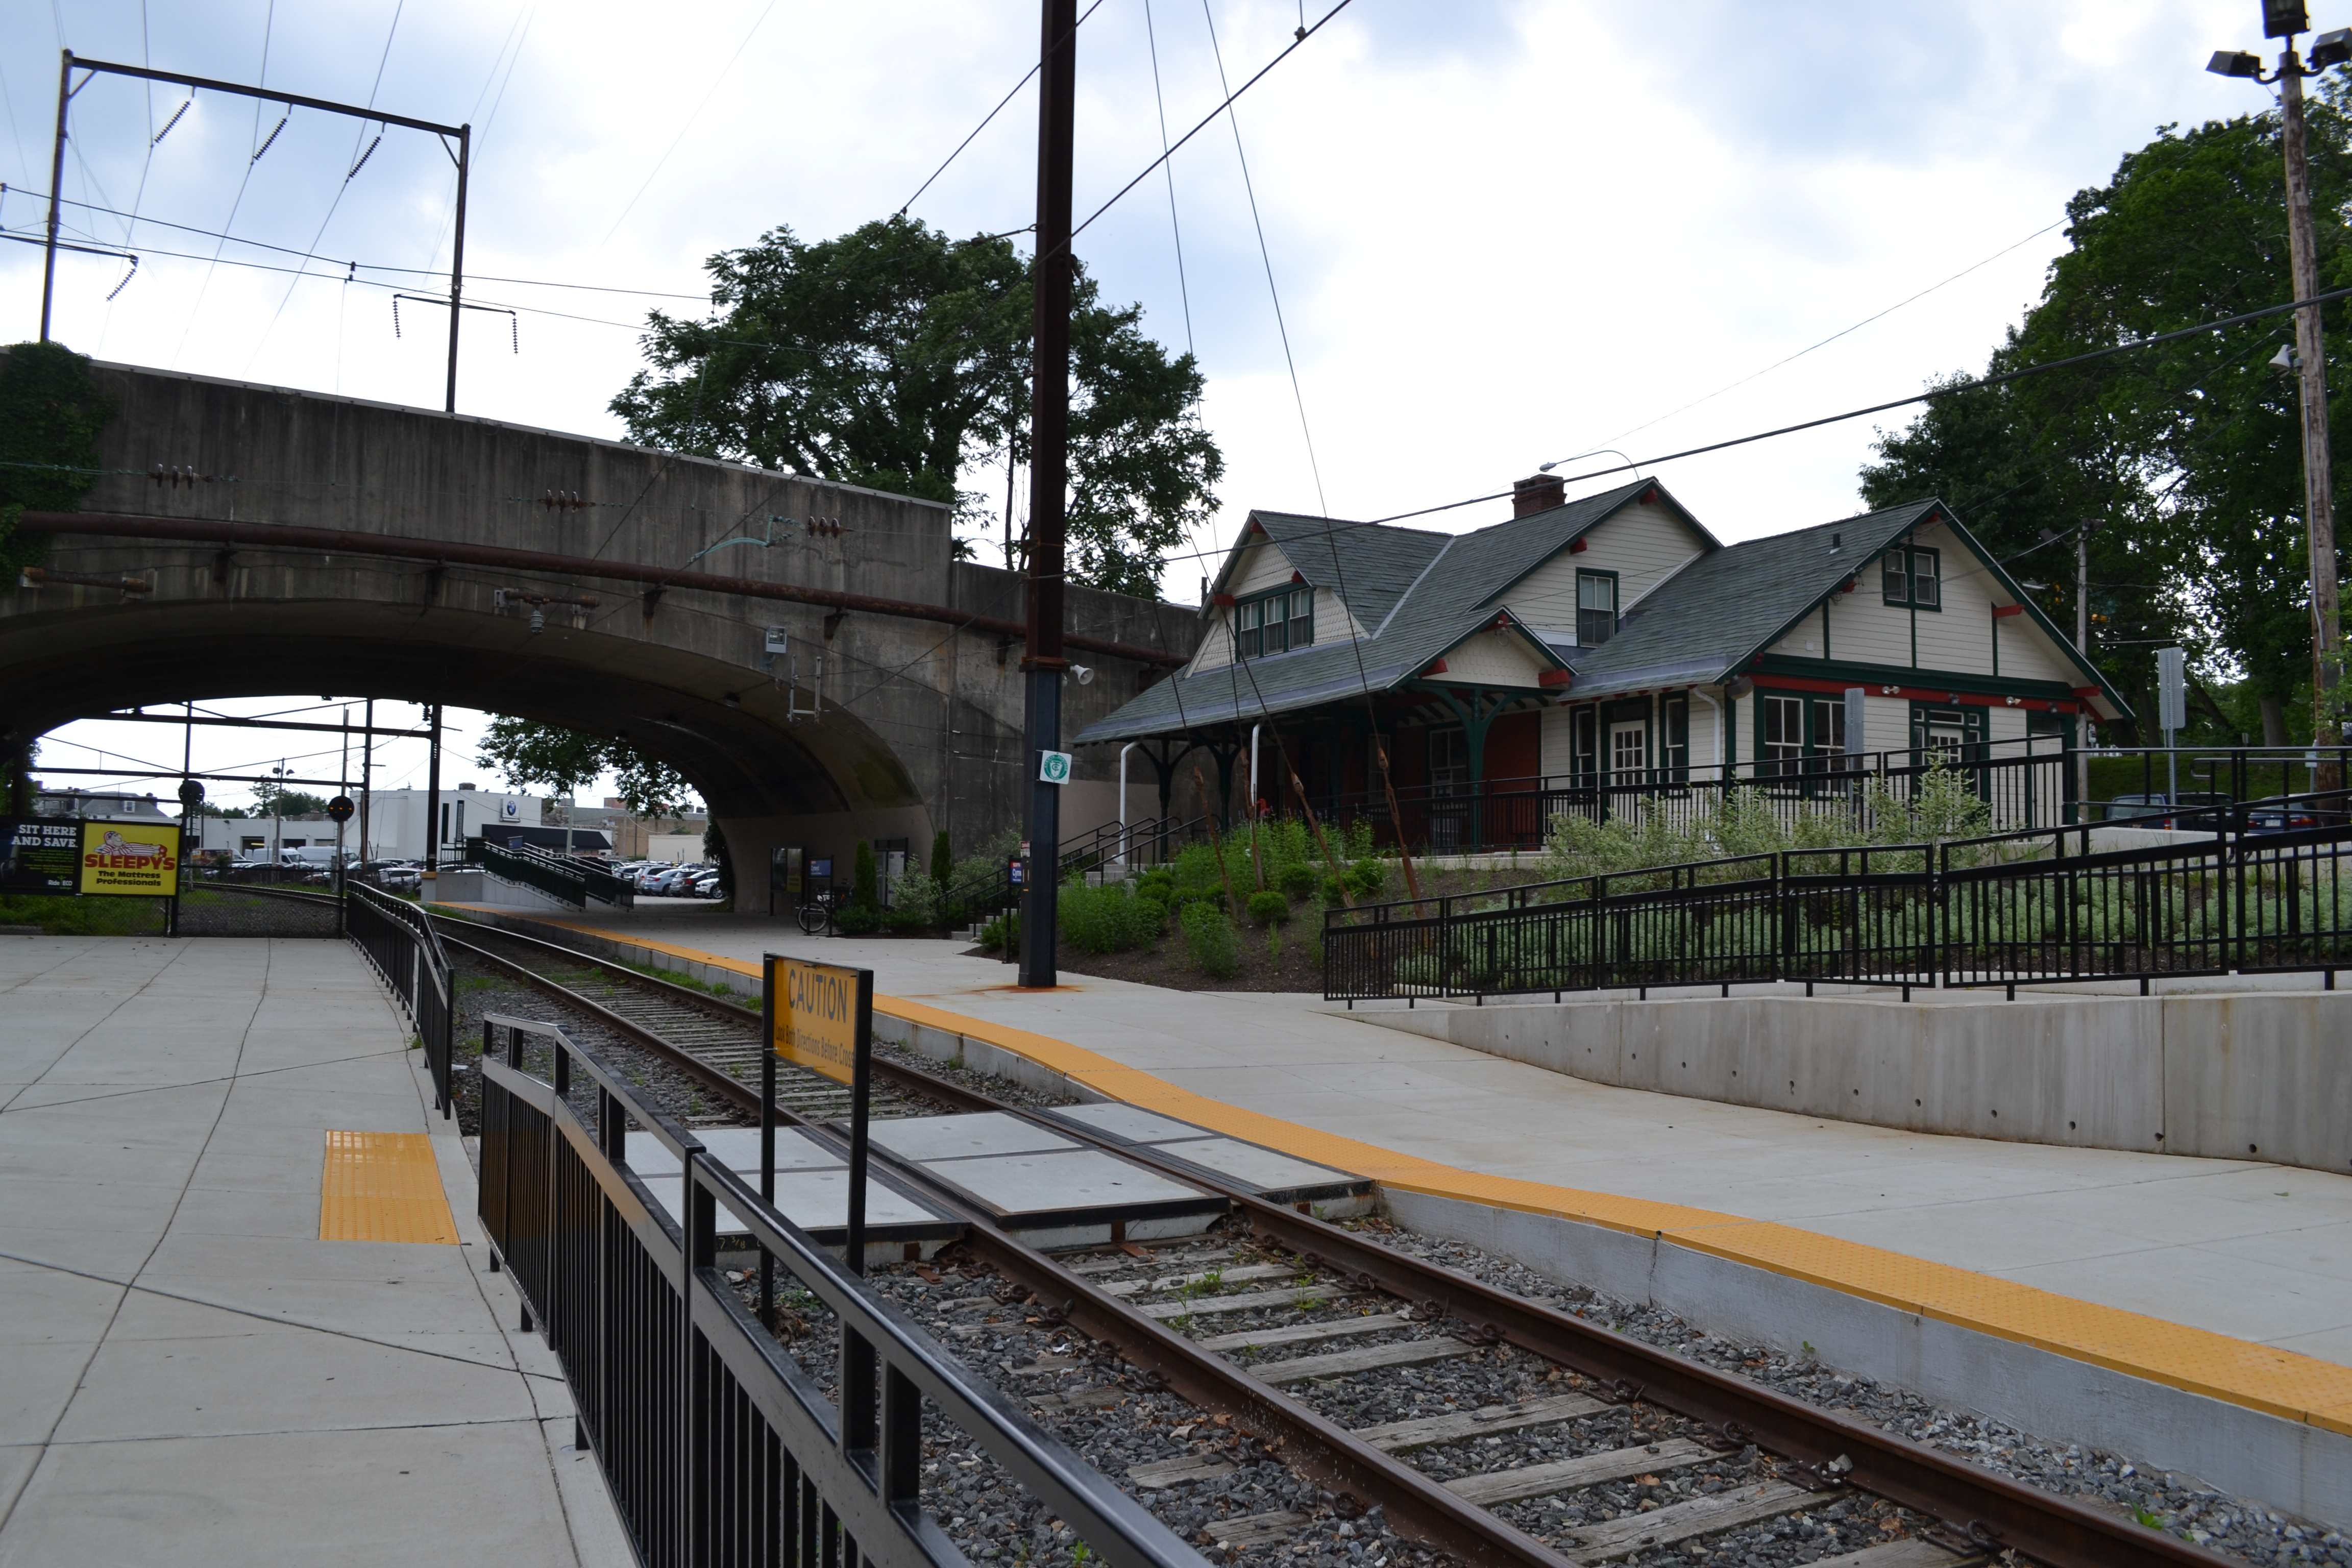 Cynwyd Station serves as both a trailhead and waiting area for SEPTA passengers